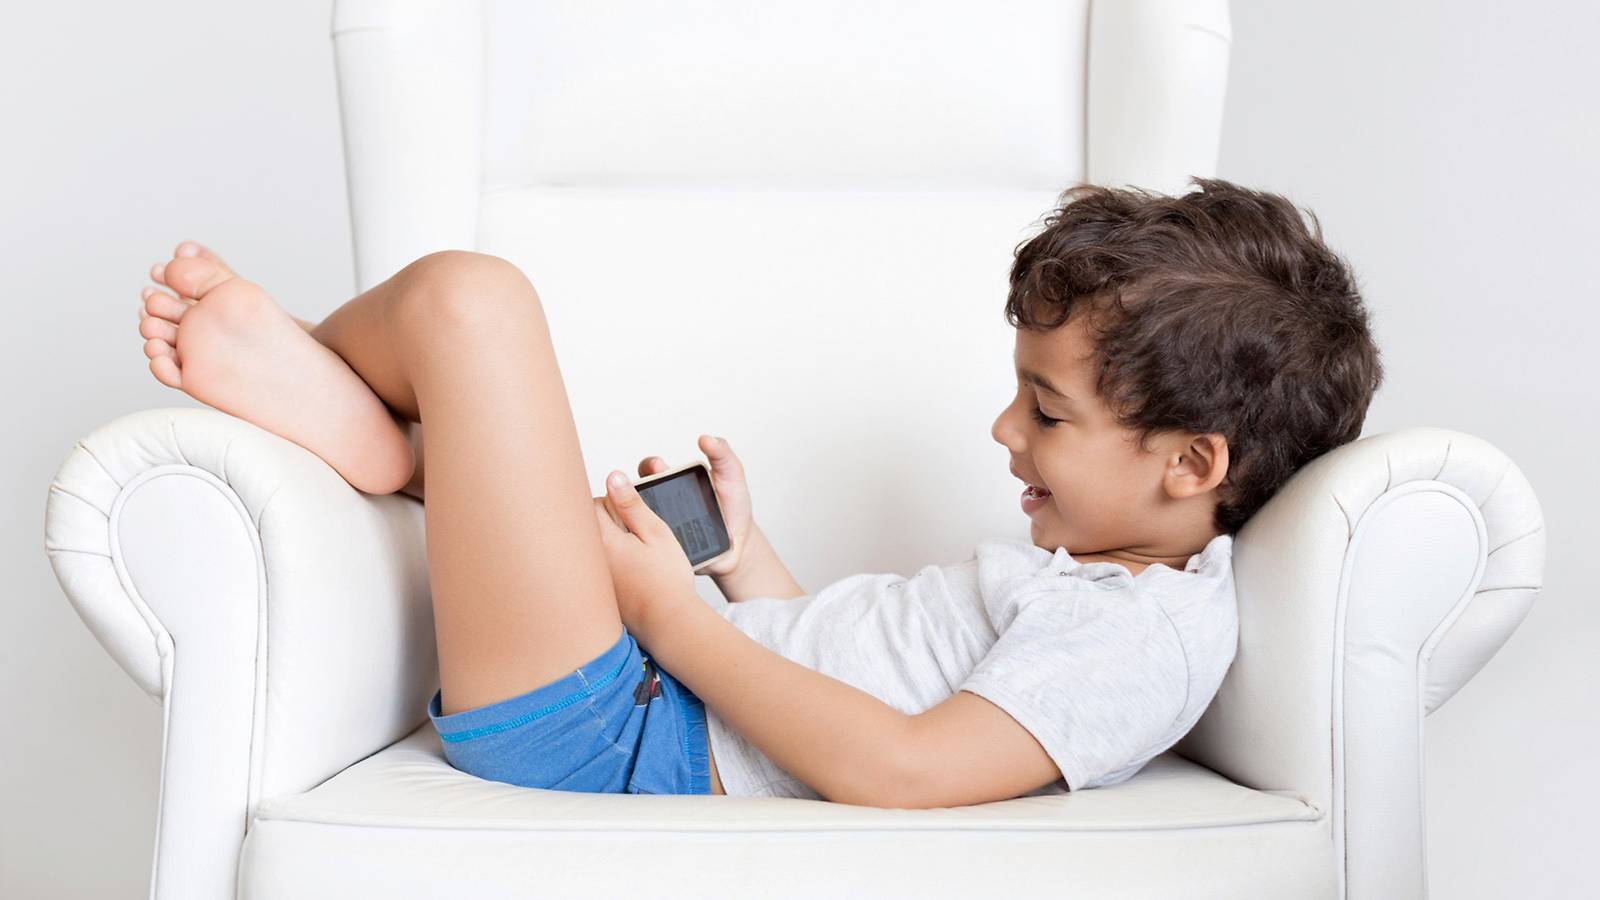 Psychiatrists warn parents about kids’ mobile addiction